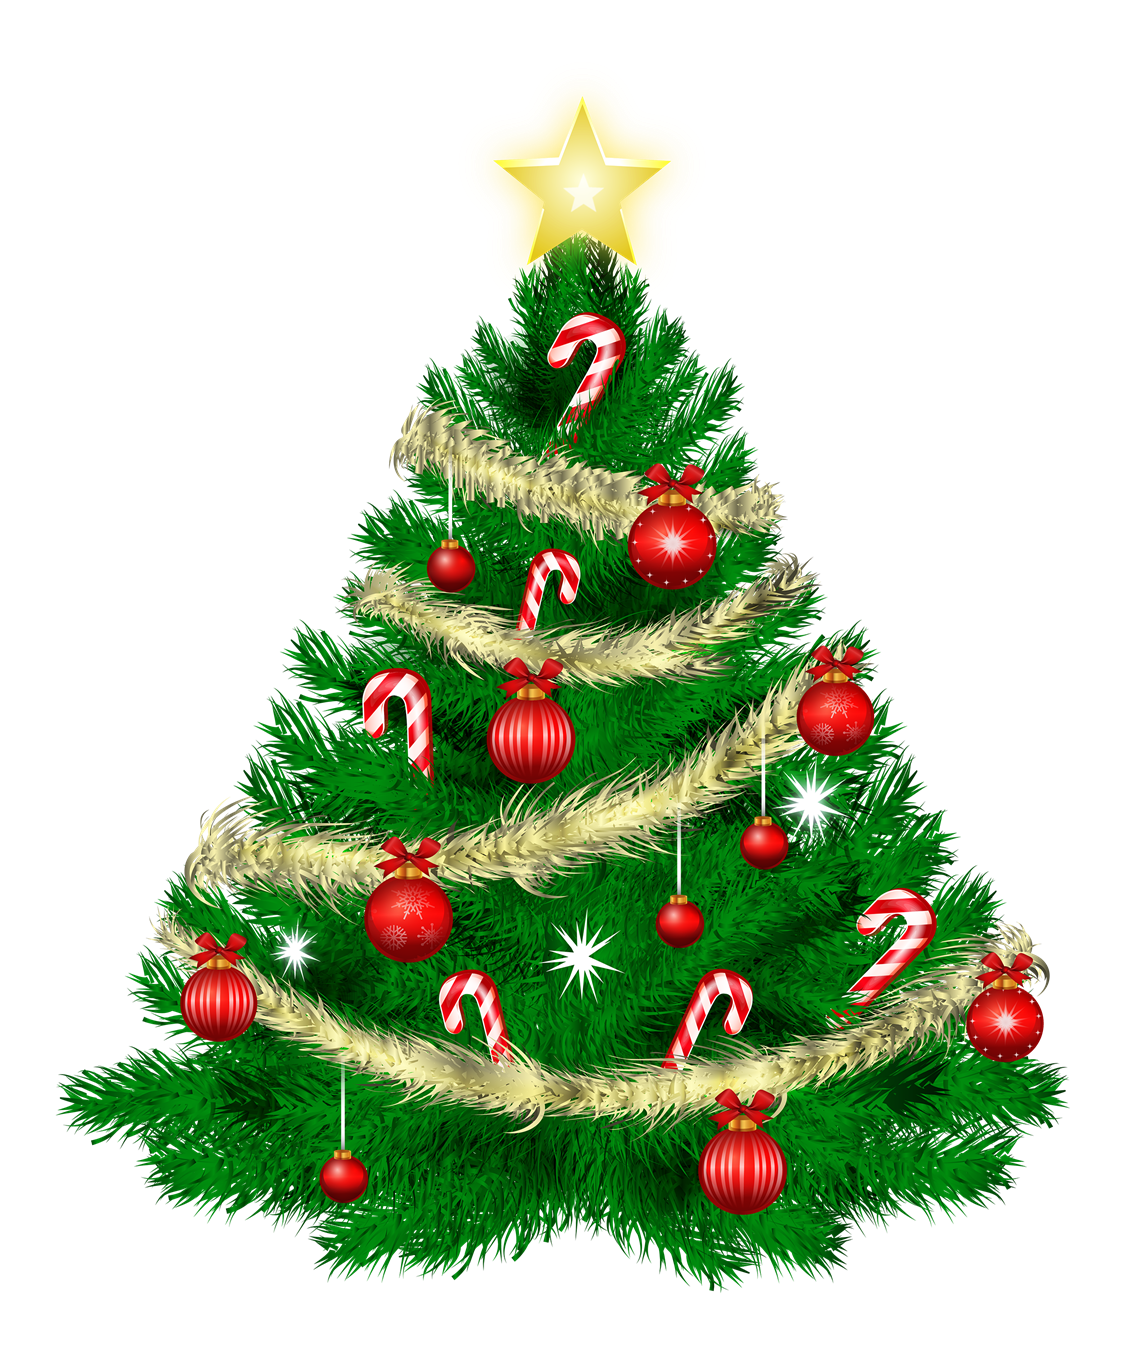 Fir-Tree Christmas Bauble Free HD Image PNG Image